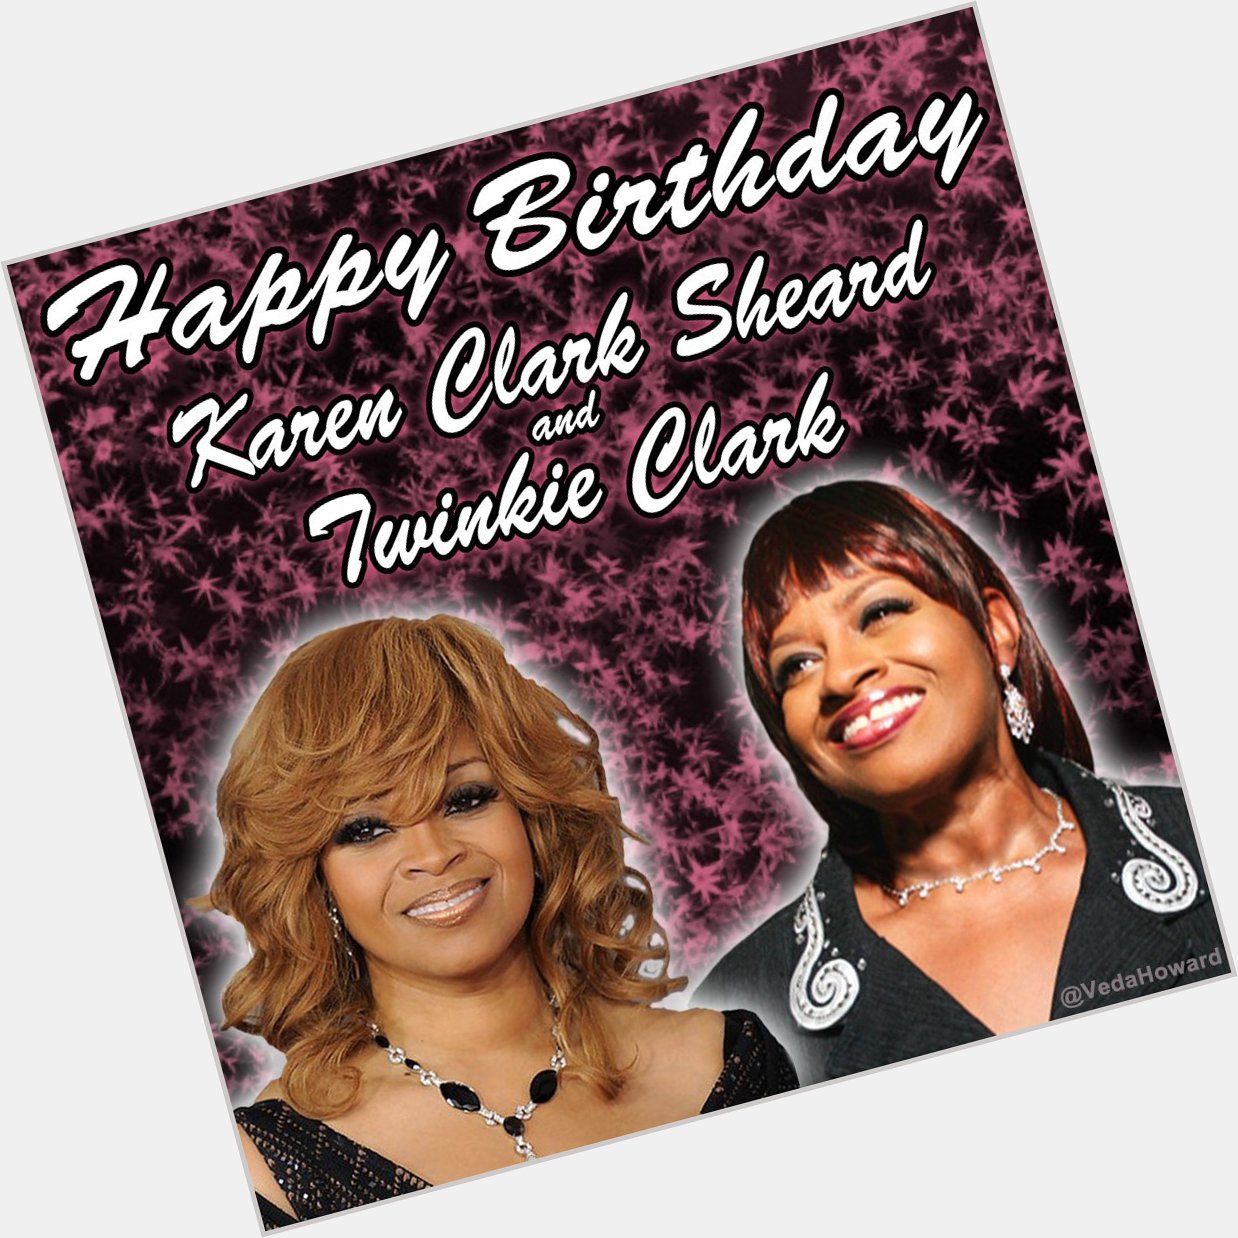 HAPPY BIRTHDAY to Gospel Sisters, and View photos  